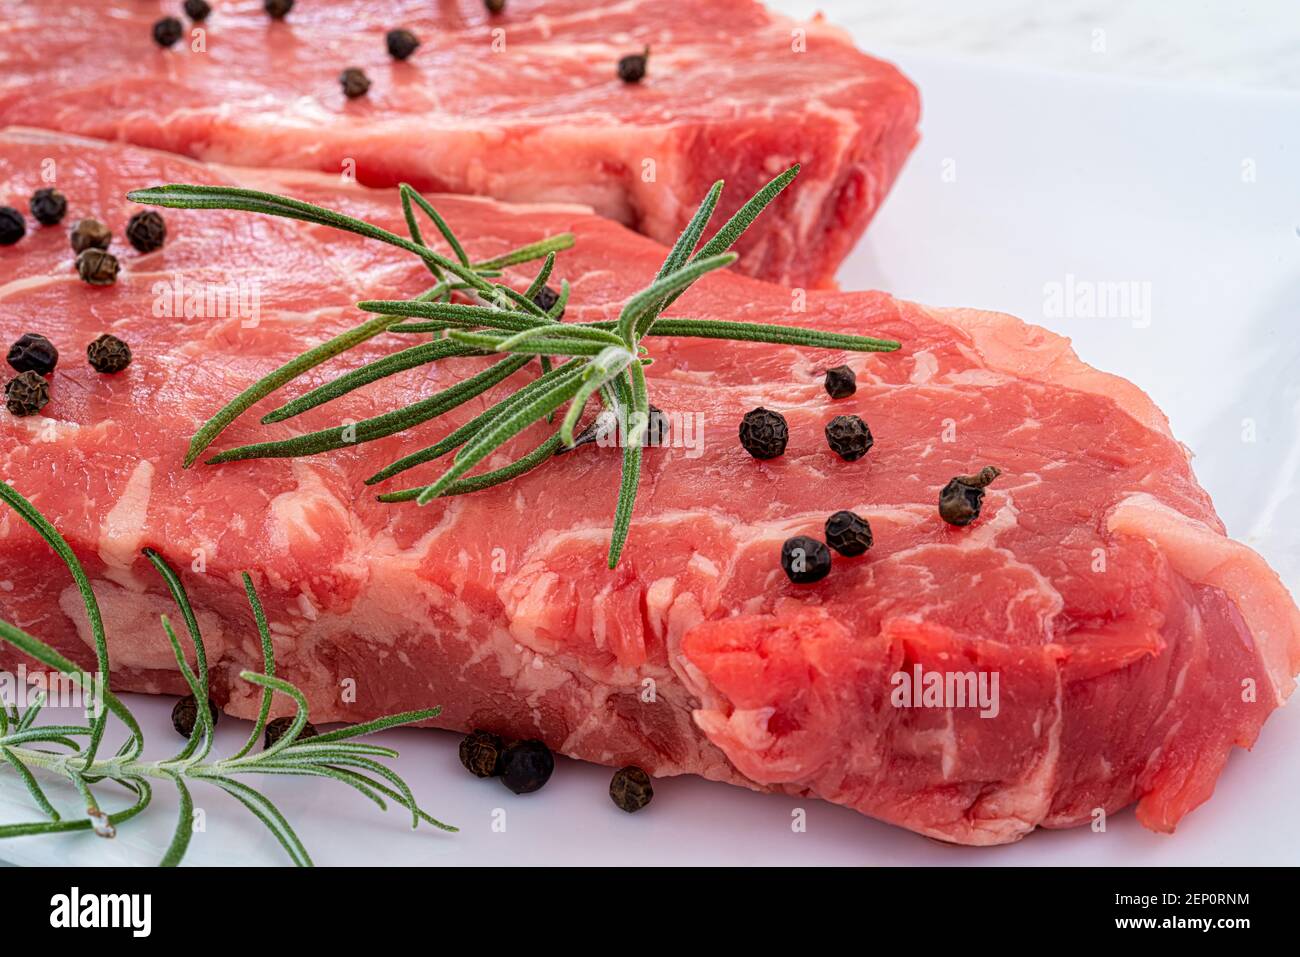 Marbled beef striploin steak garnished with rosemary and peppercorns on a white plate. Stock Photo